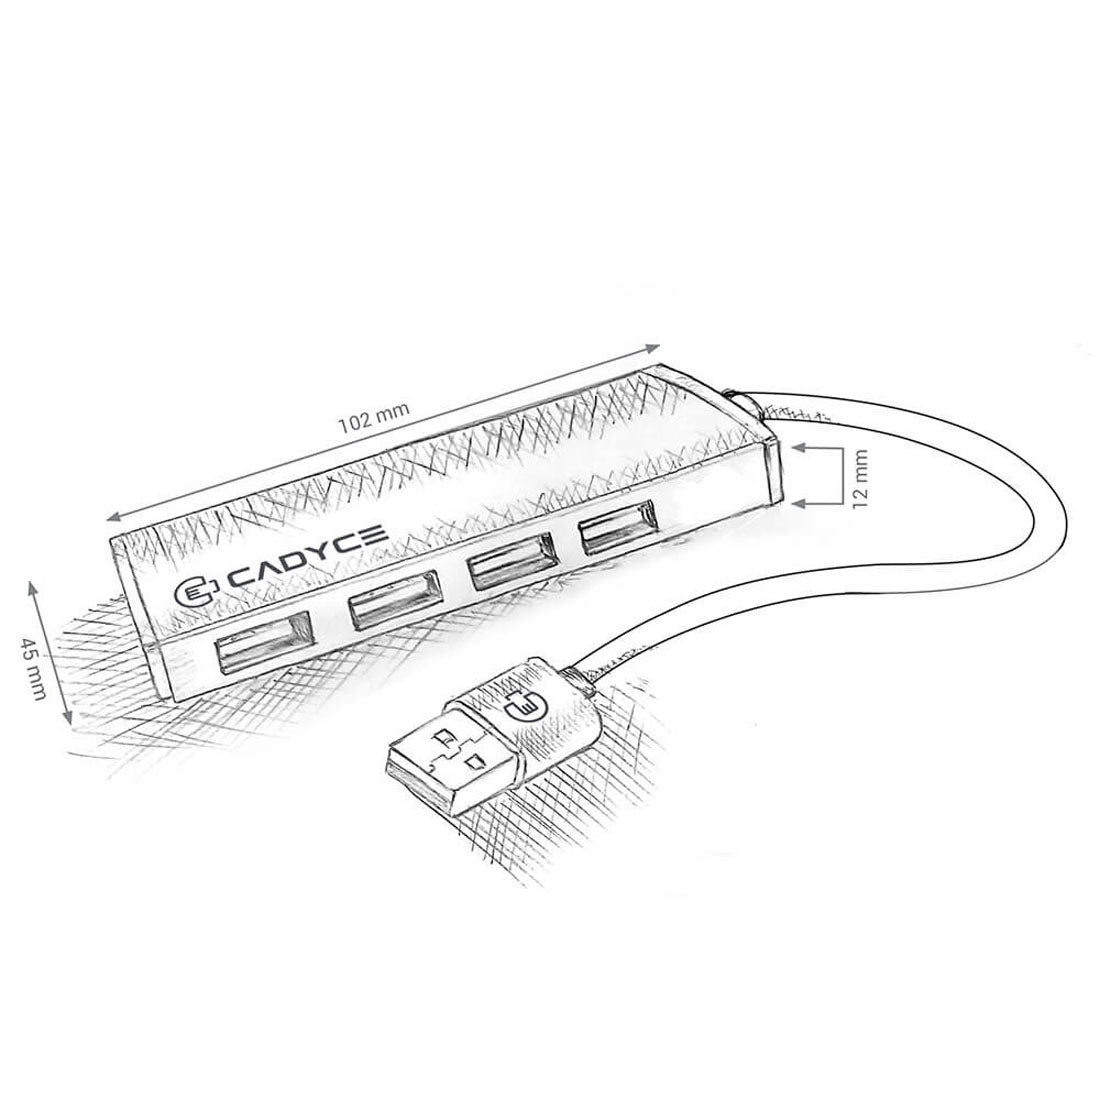 [RePacked] Cadyce CA-U4H 4 Port USB 2.0 Hub with Over-Current Detection and Protection